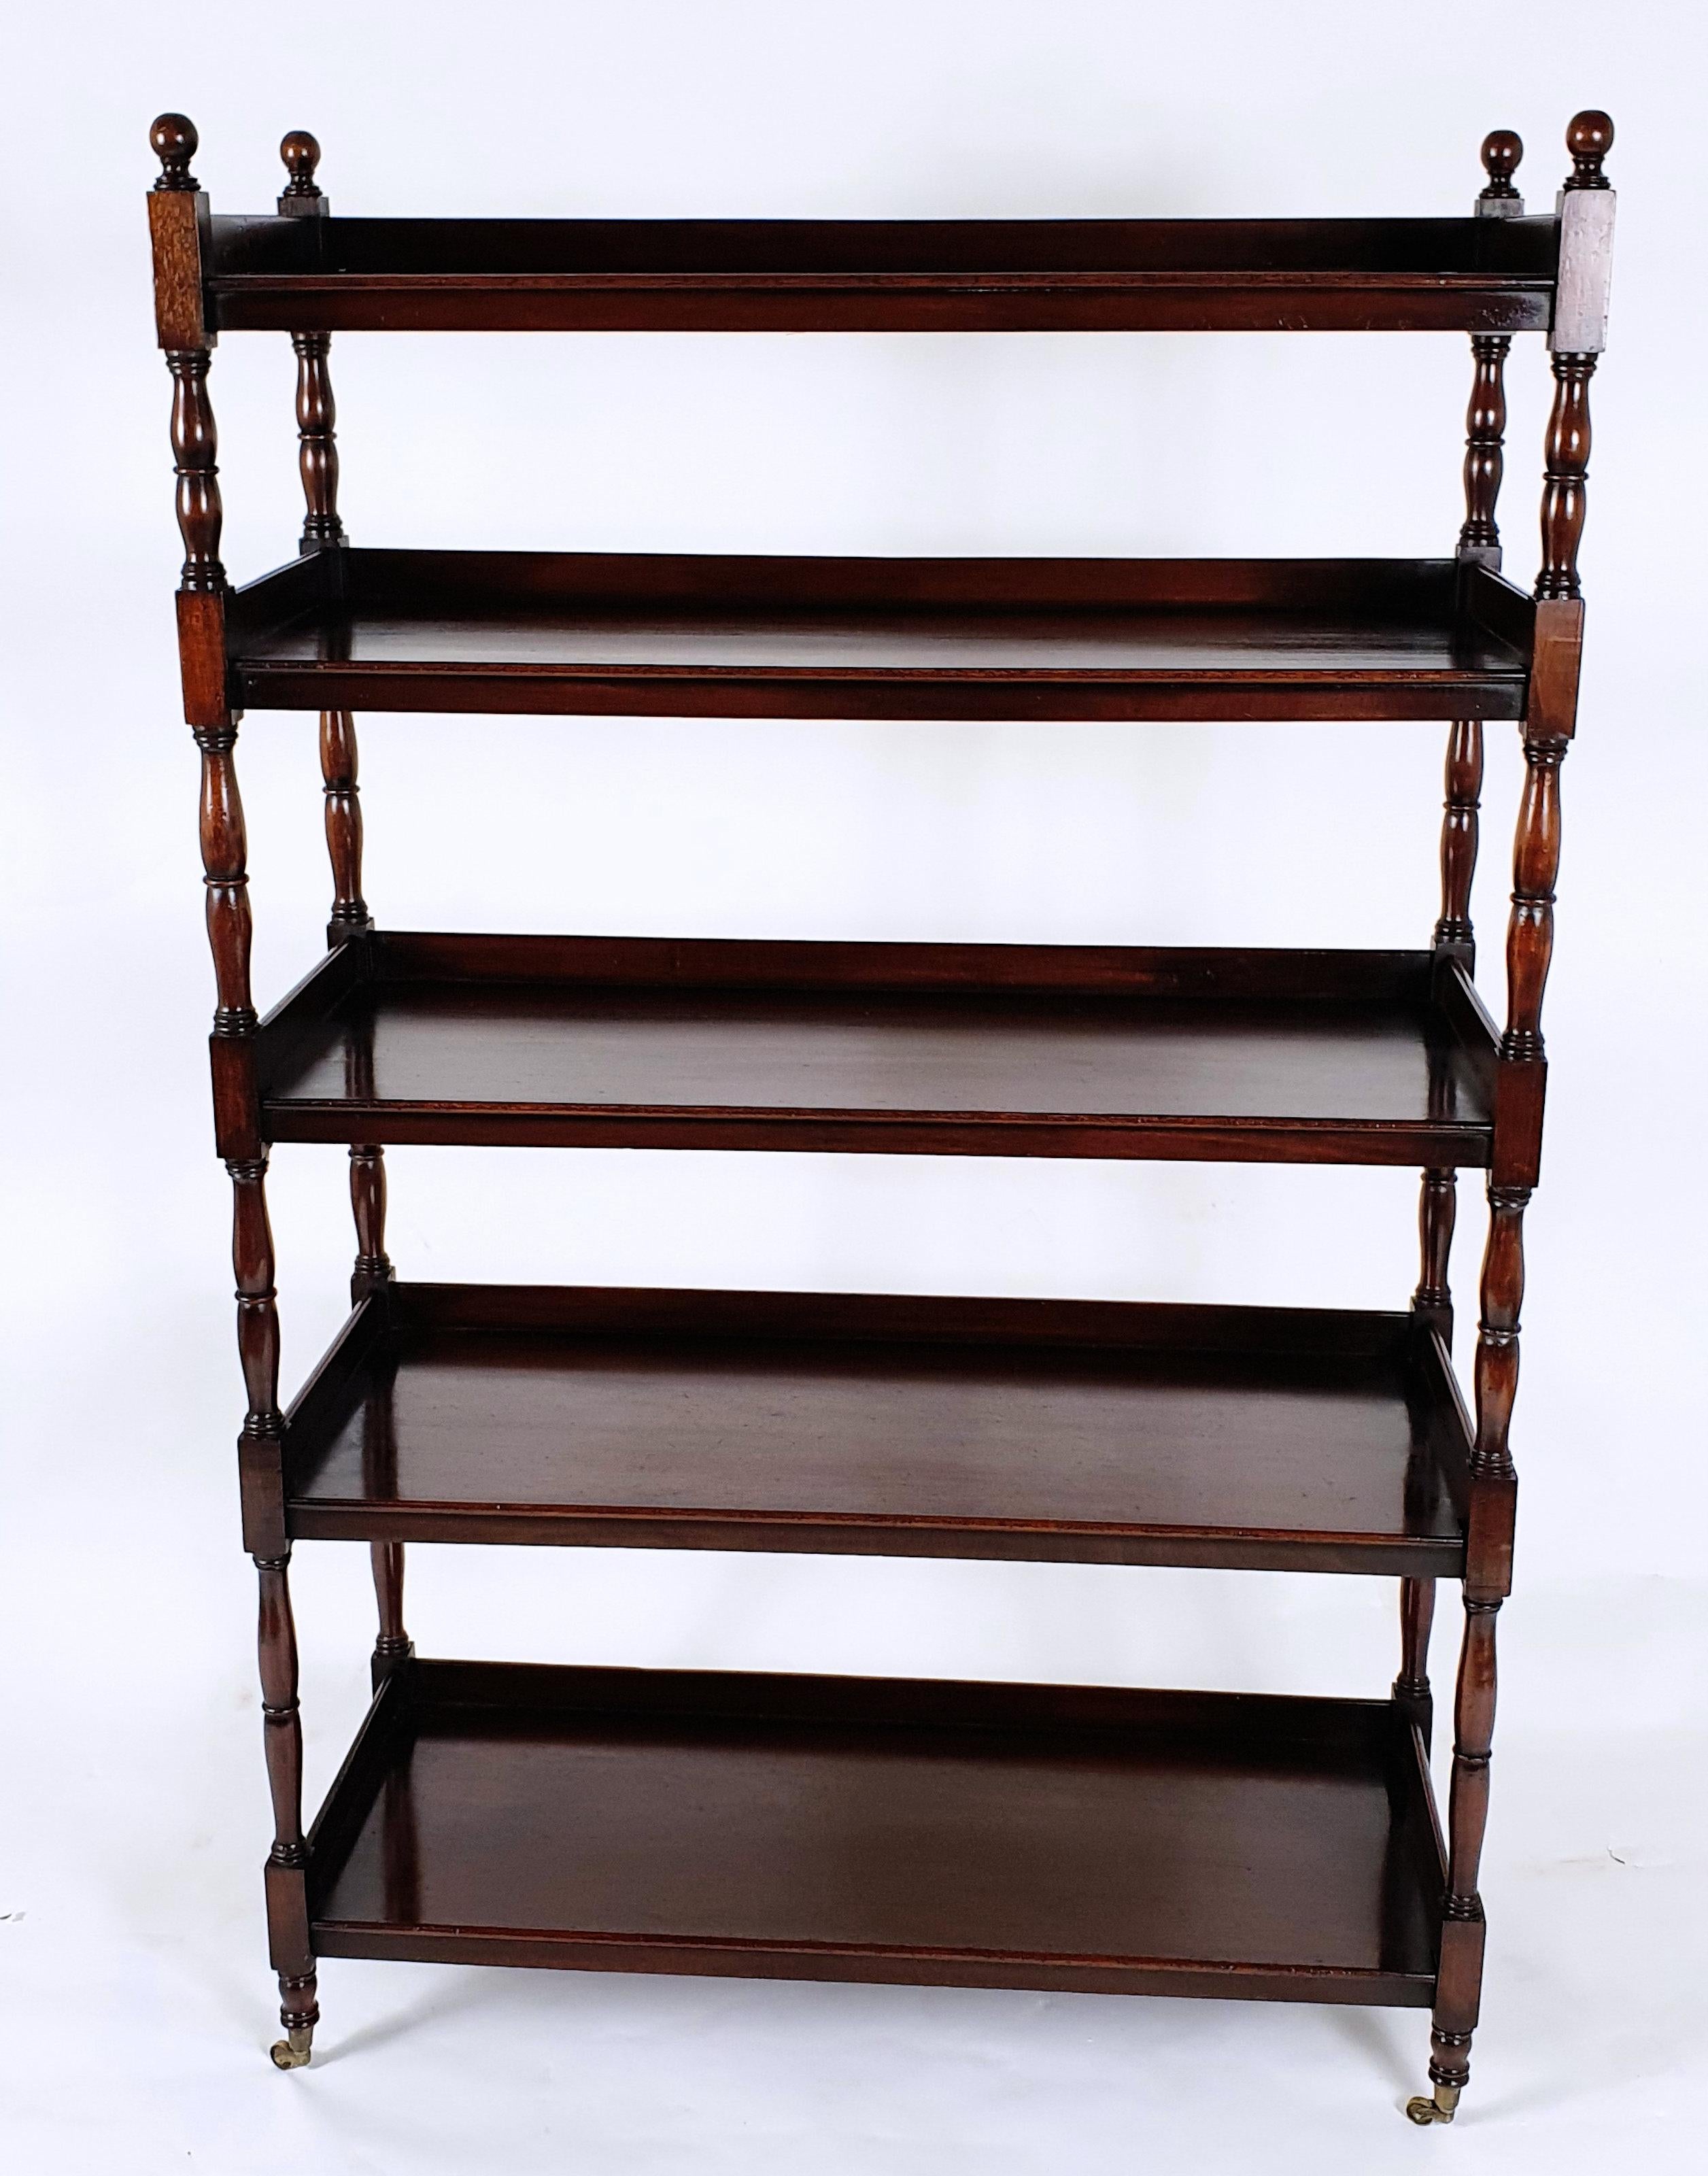 This superb and very rare pair of English Edwardian mahogany open bookcases feature 5 tiers with ¾ galleries. The shelves are united by slender turned columns and stand on brass castors. Each unit measures 36 ¼ in – 92 cm wide, 14 ½ in – 36.8 cm